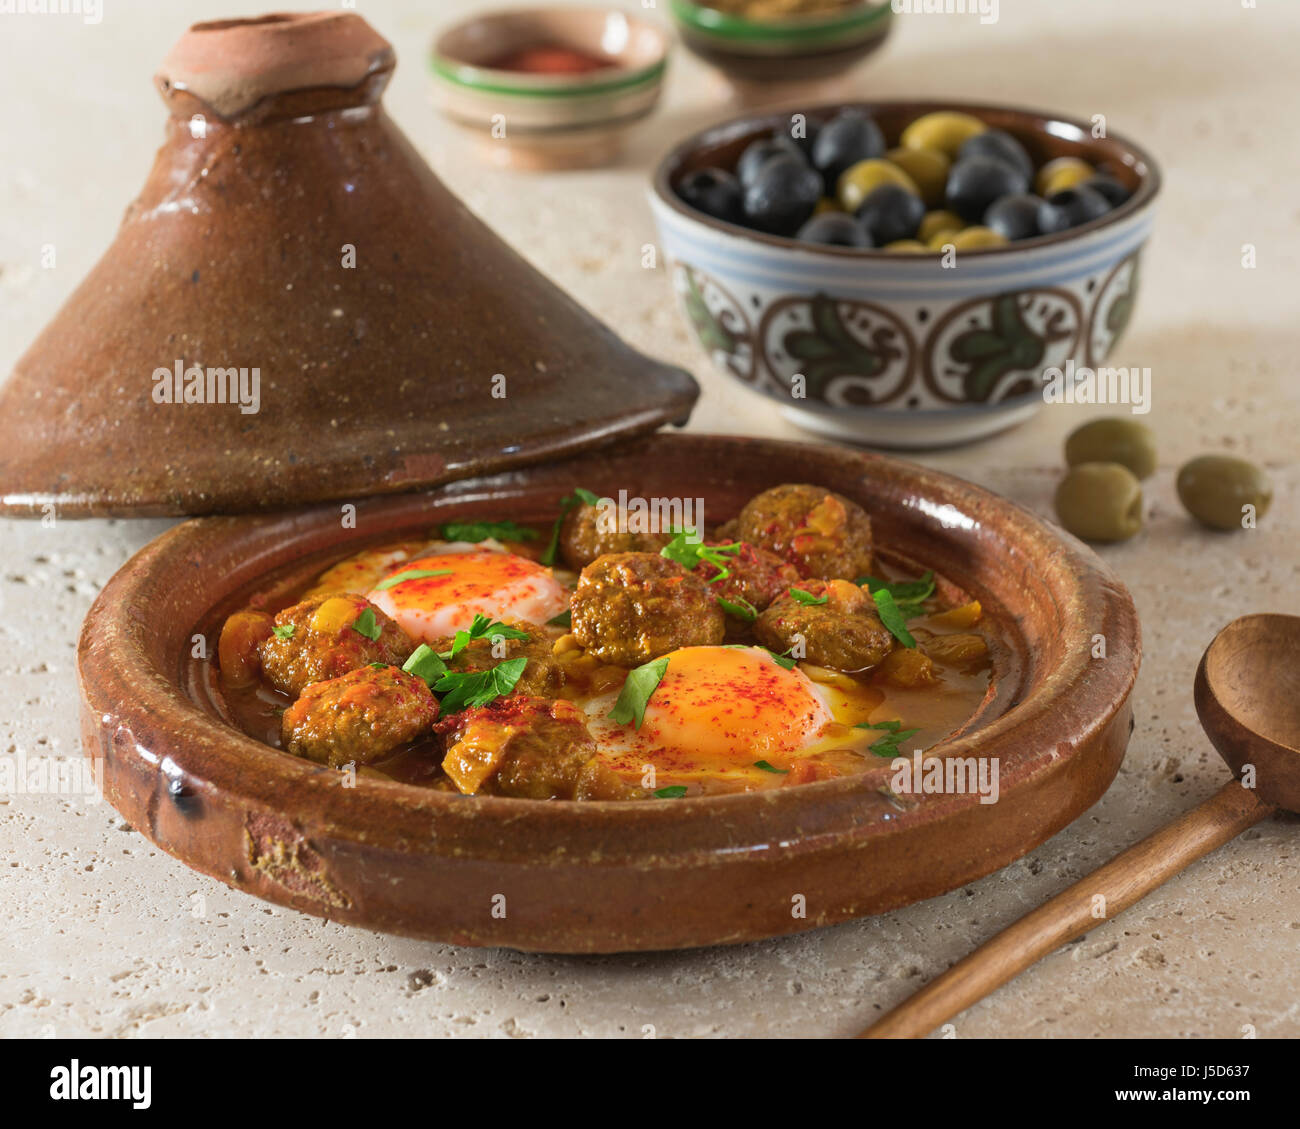 Kefta tagine. Spicy meatballs with eggs. Morocco Food Stock Photo